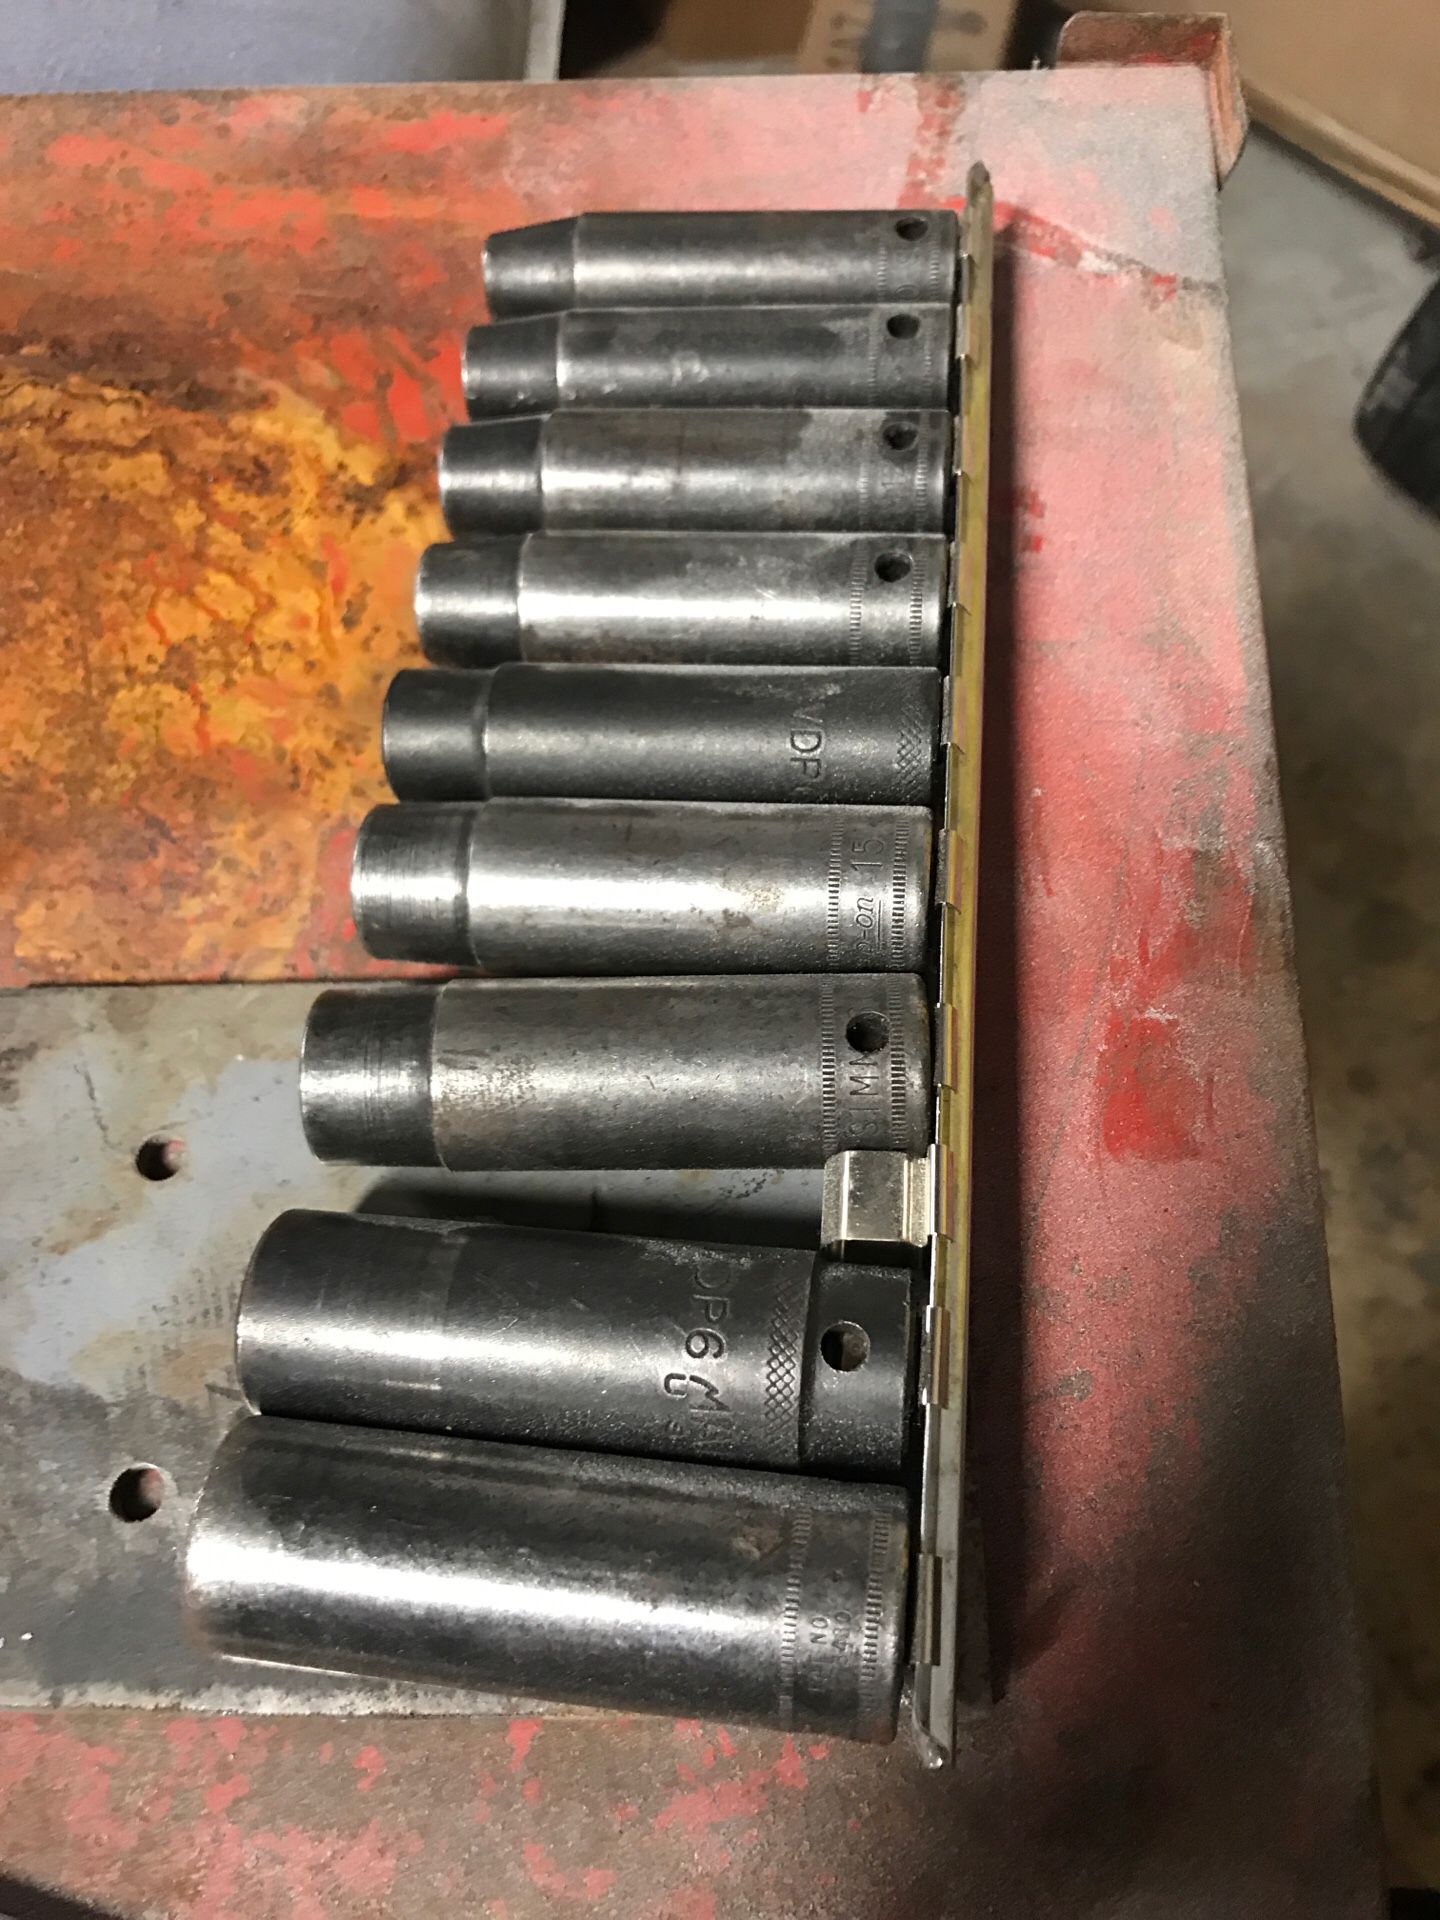 Snap on and Mac tools 1/2” drive impact metric